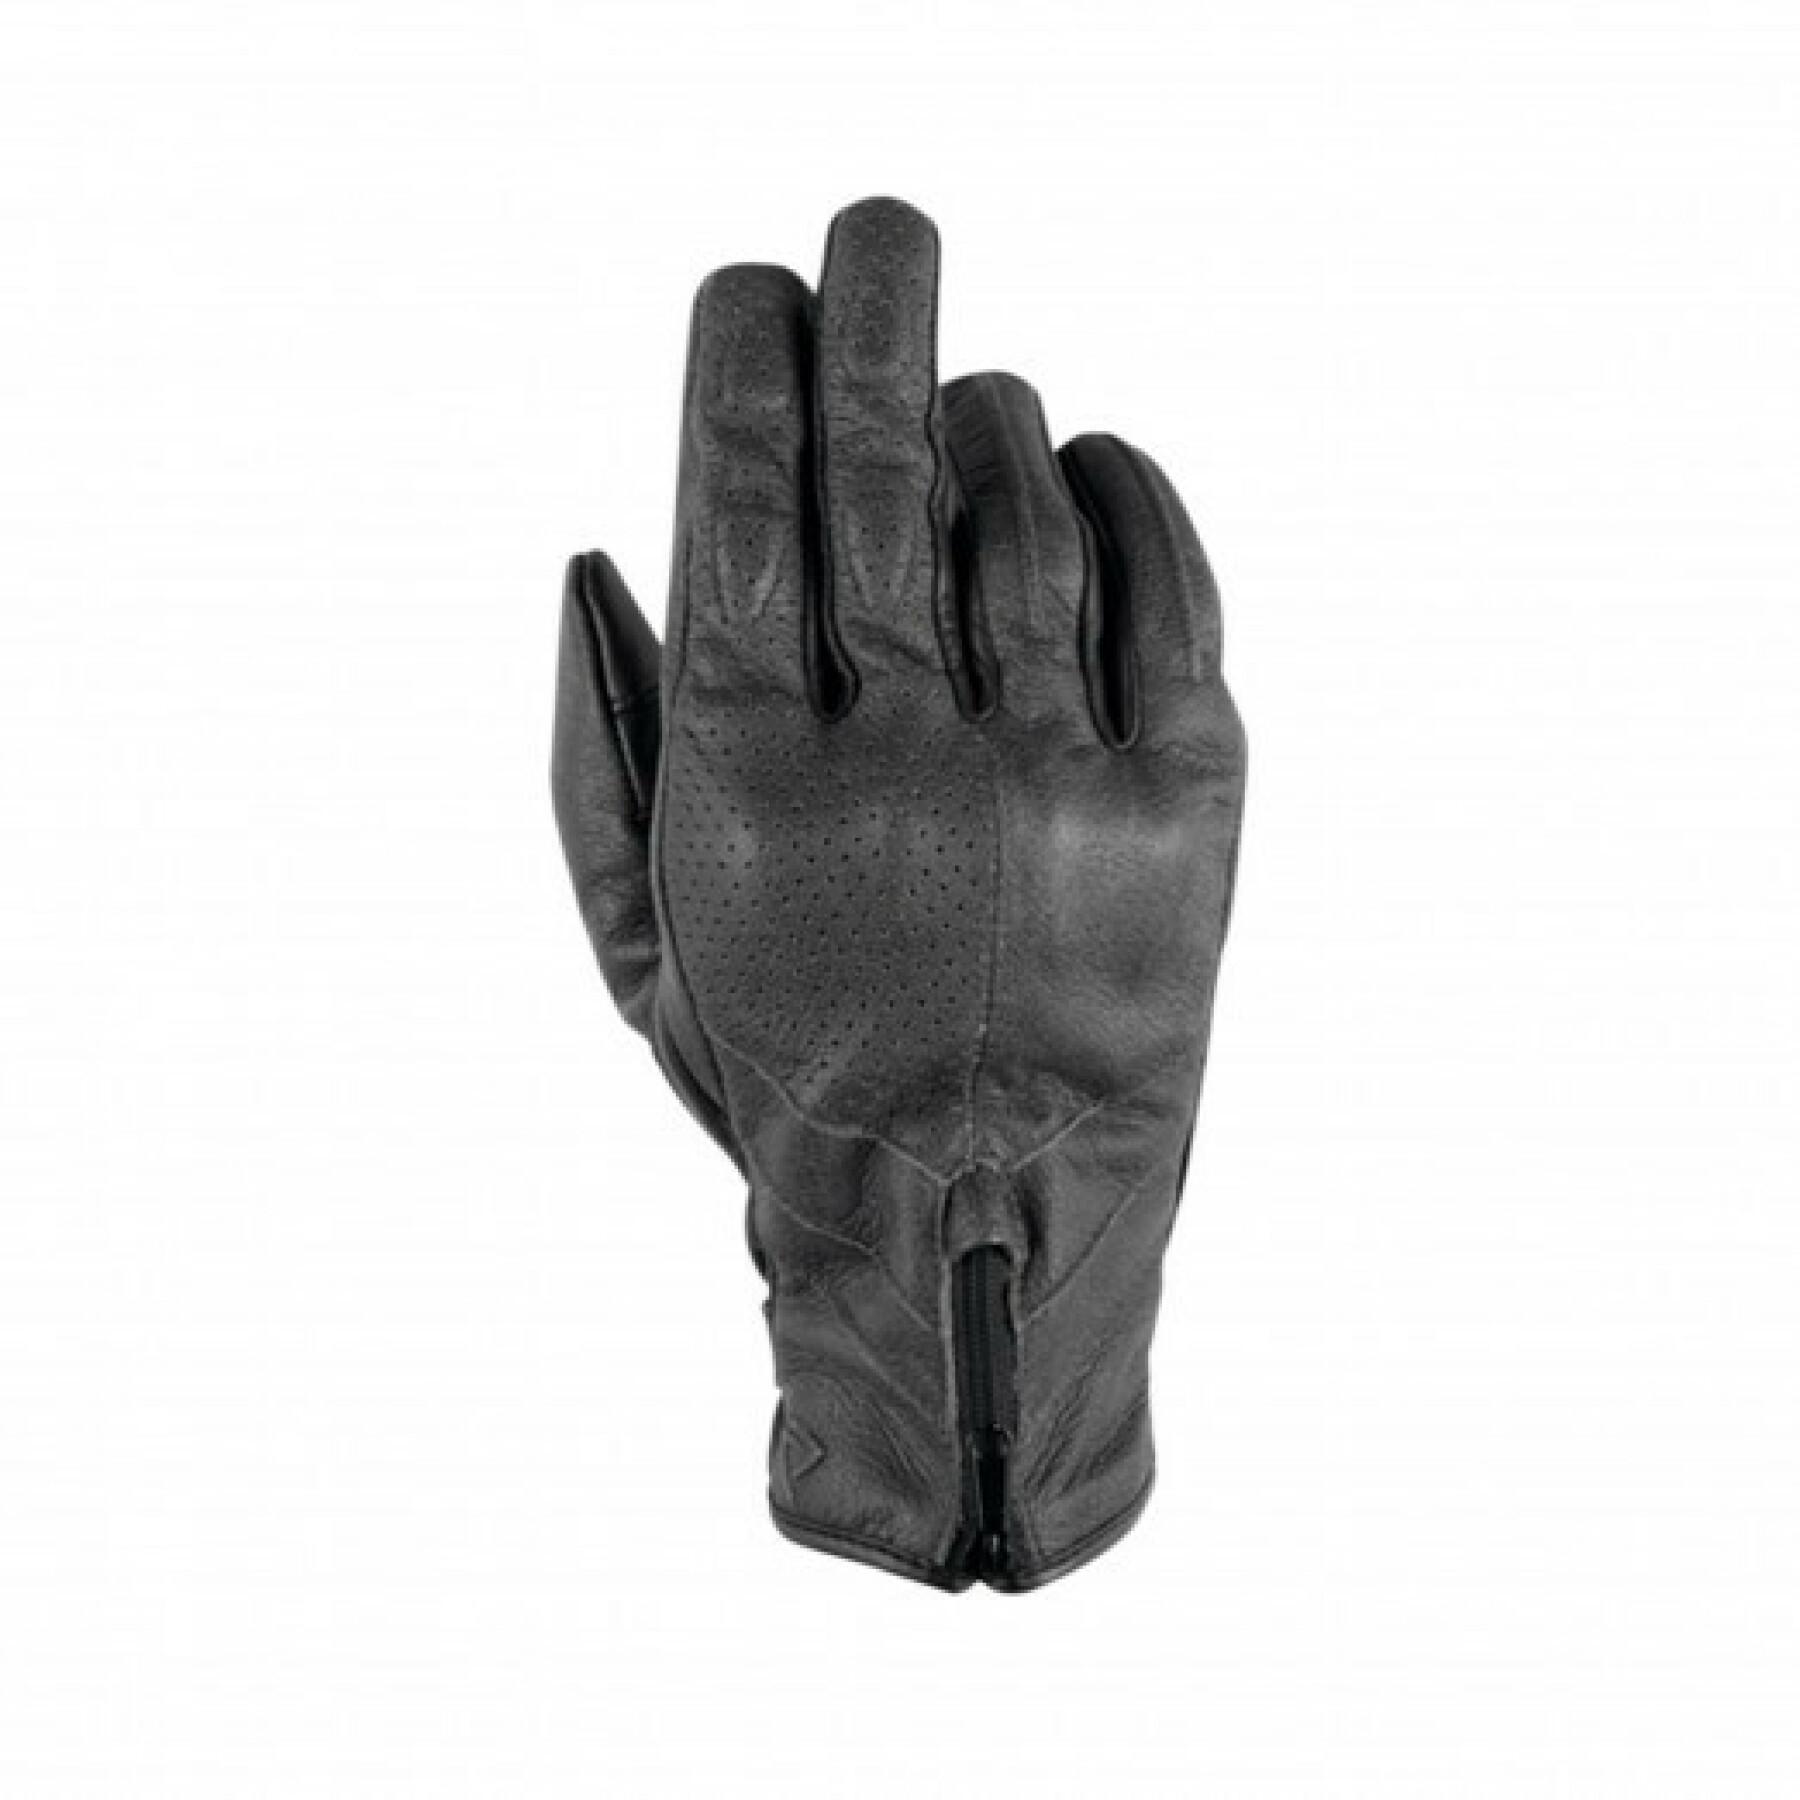 Heated motorcycle gloves Difi montana